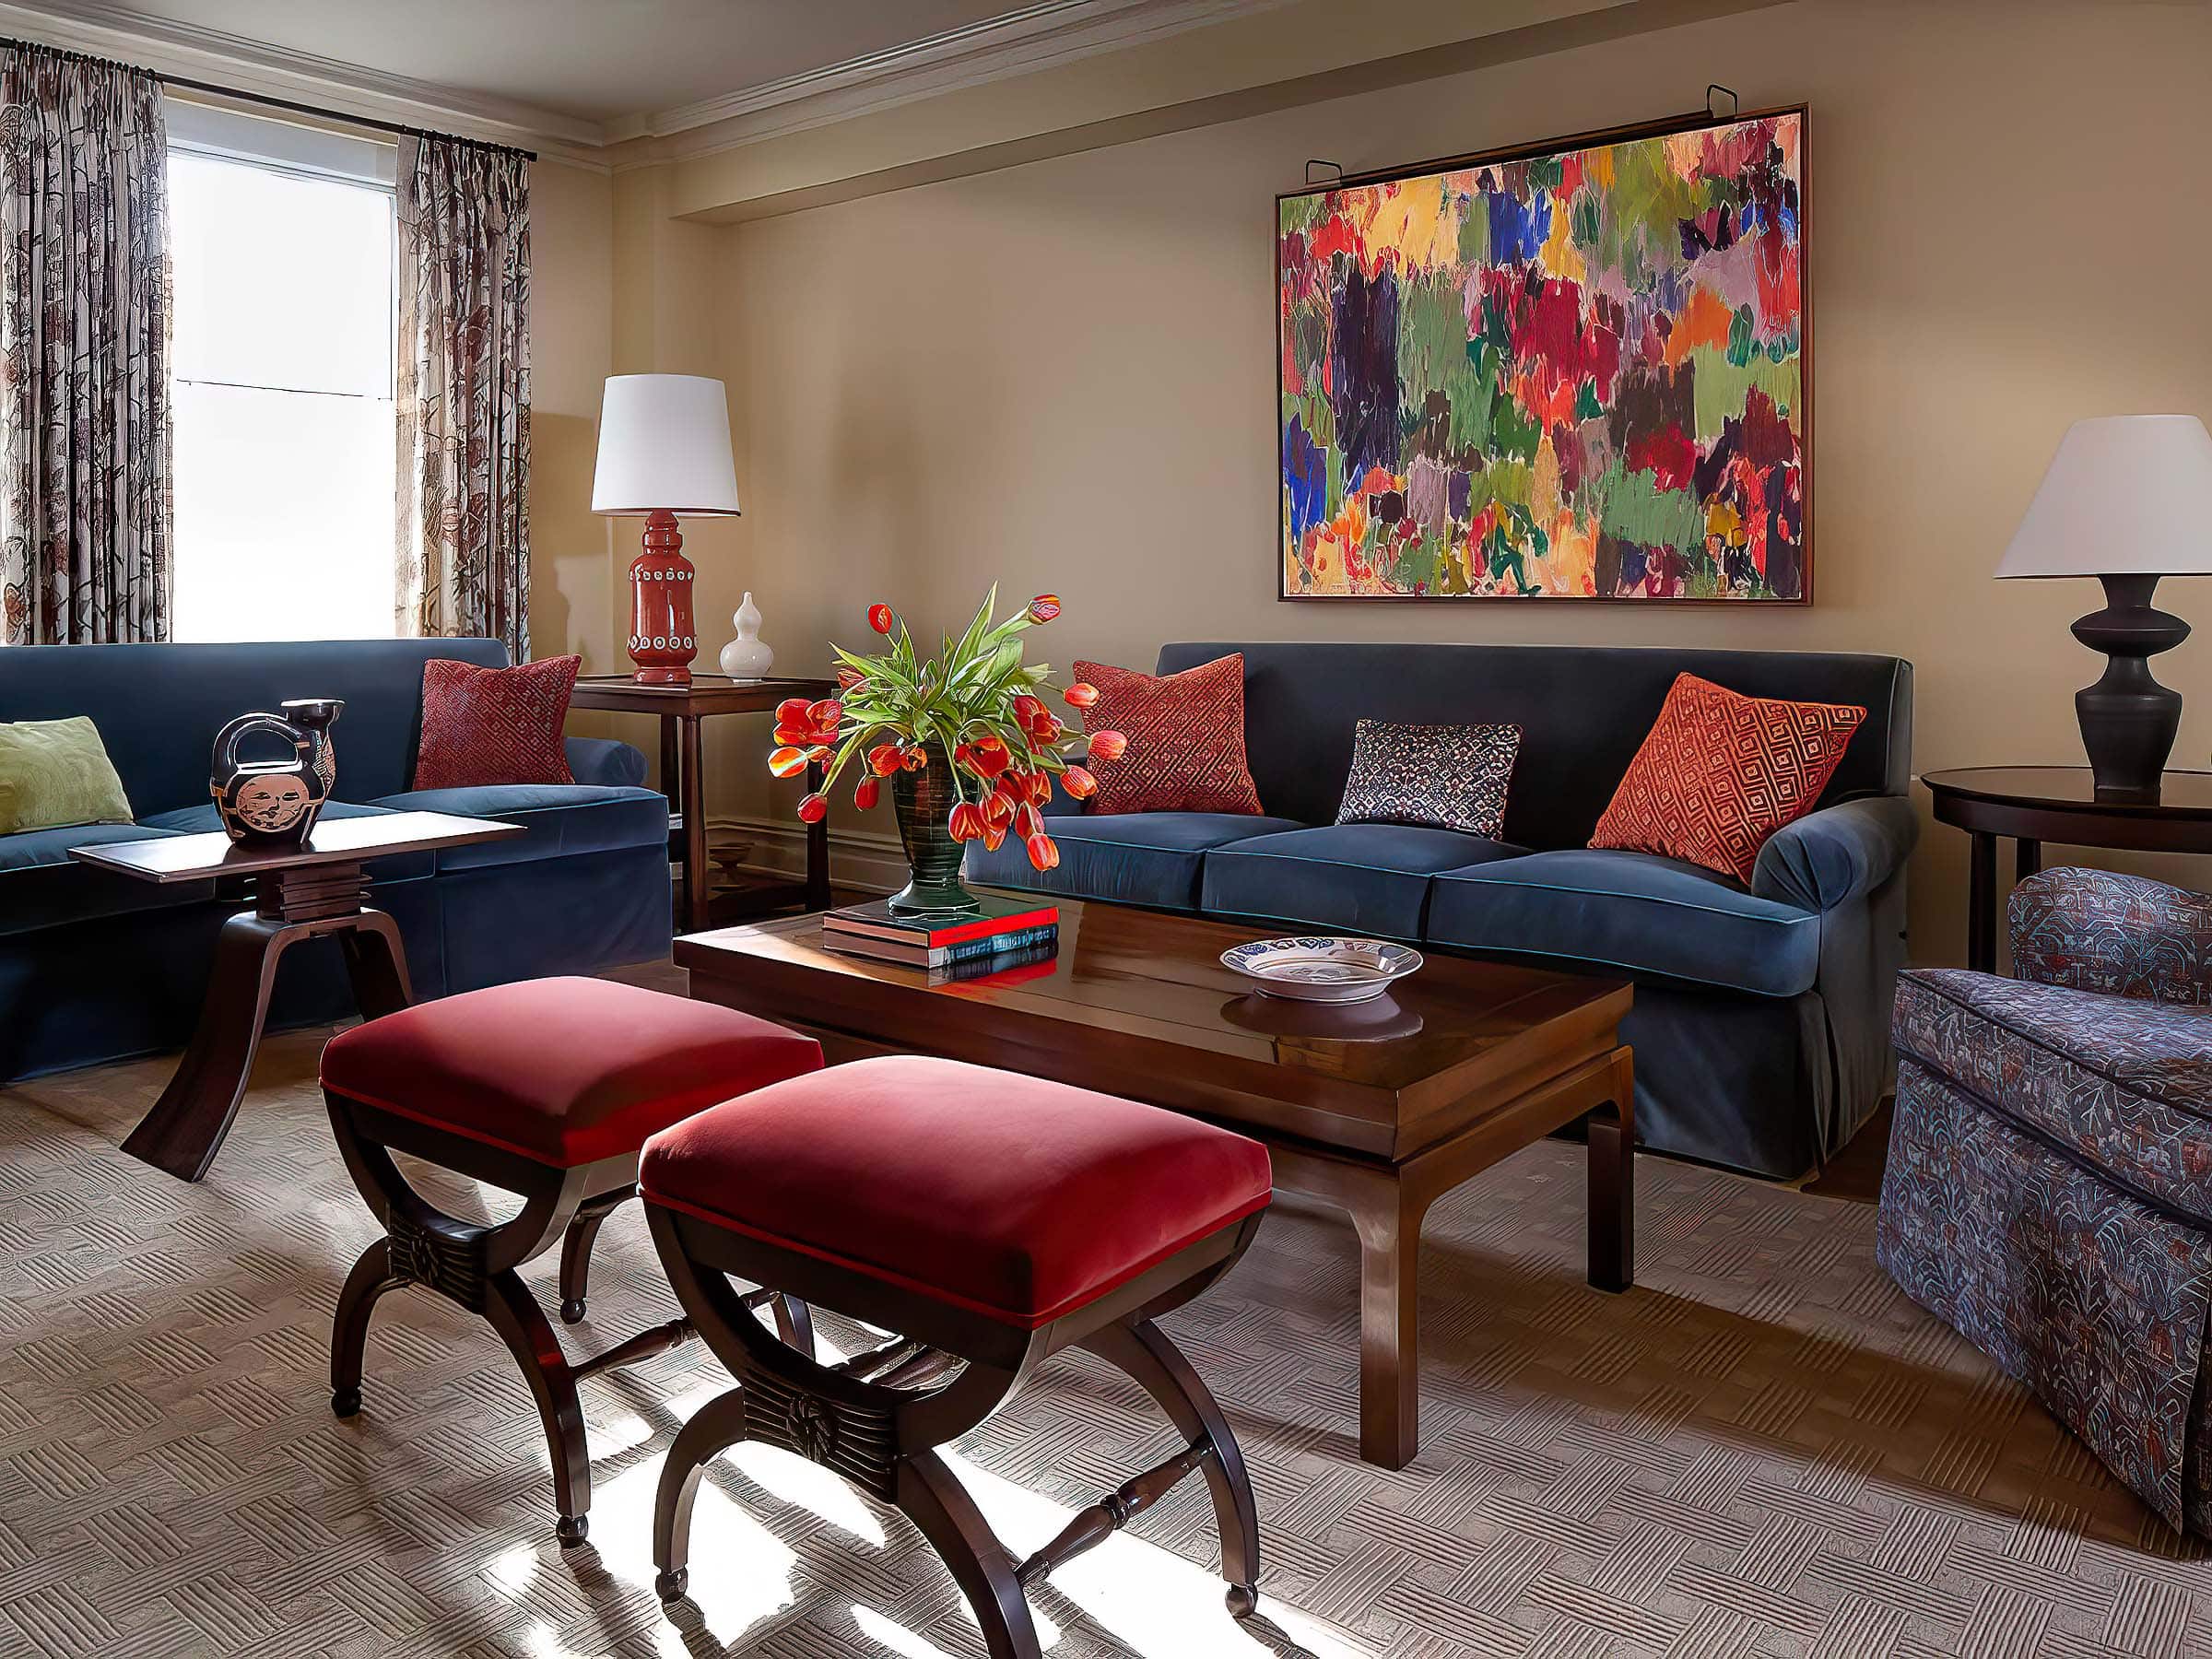 A vibrant canvas by the late American abstract impressionist painter John Opper (1908-1994) takes pride of place in the apartment’s gracious living room. Two deep-seated sofas are upholstered in lush blue velvet, with a pair of club chairs covered in a Zak & Fox textile and two Regency-style benches covered in paprika-hued velvet. The curtains were tailored from a Cowtan & Tout floral fabric.